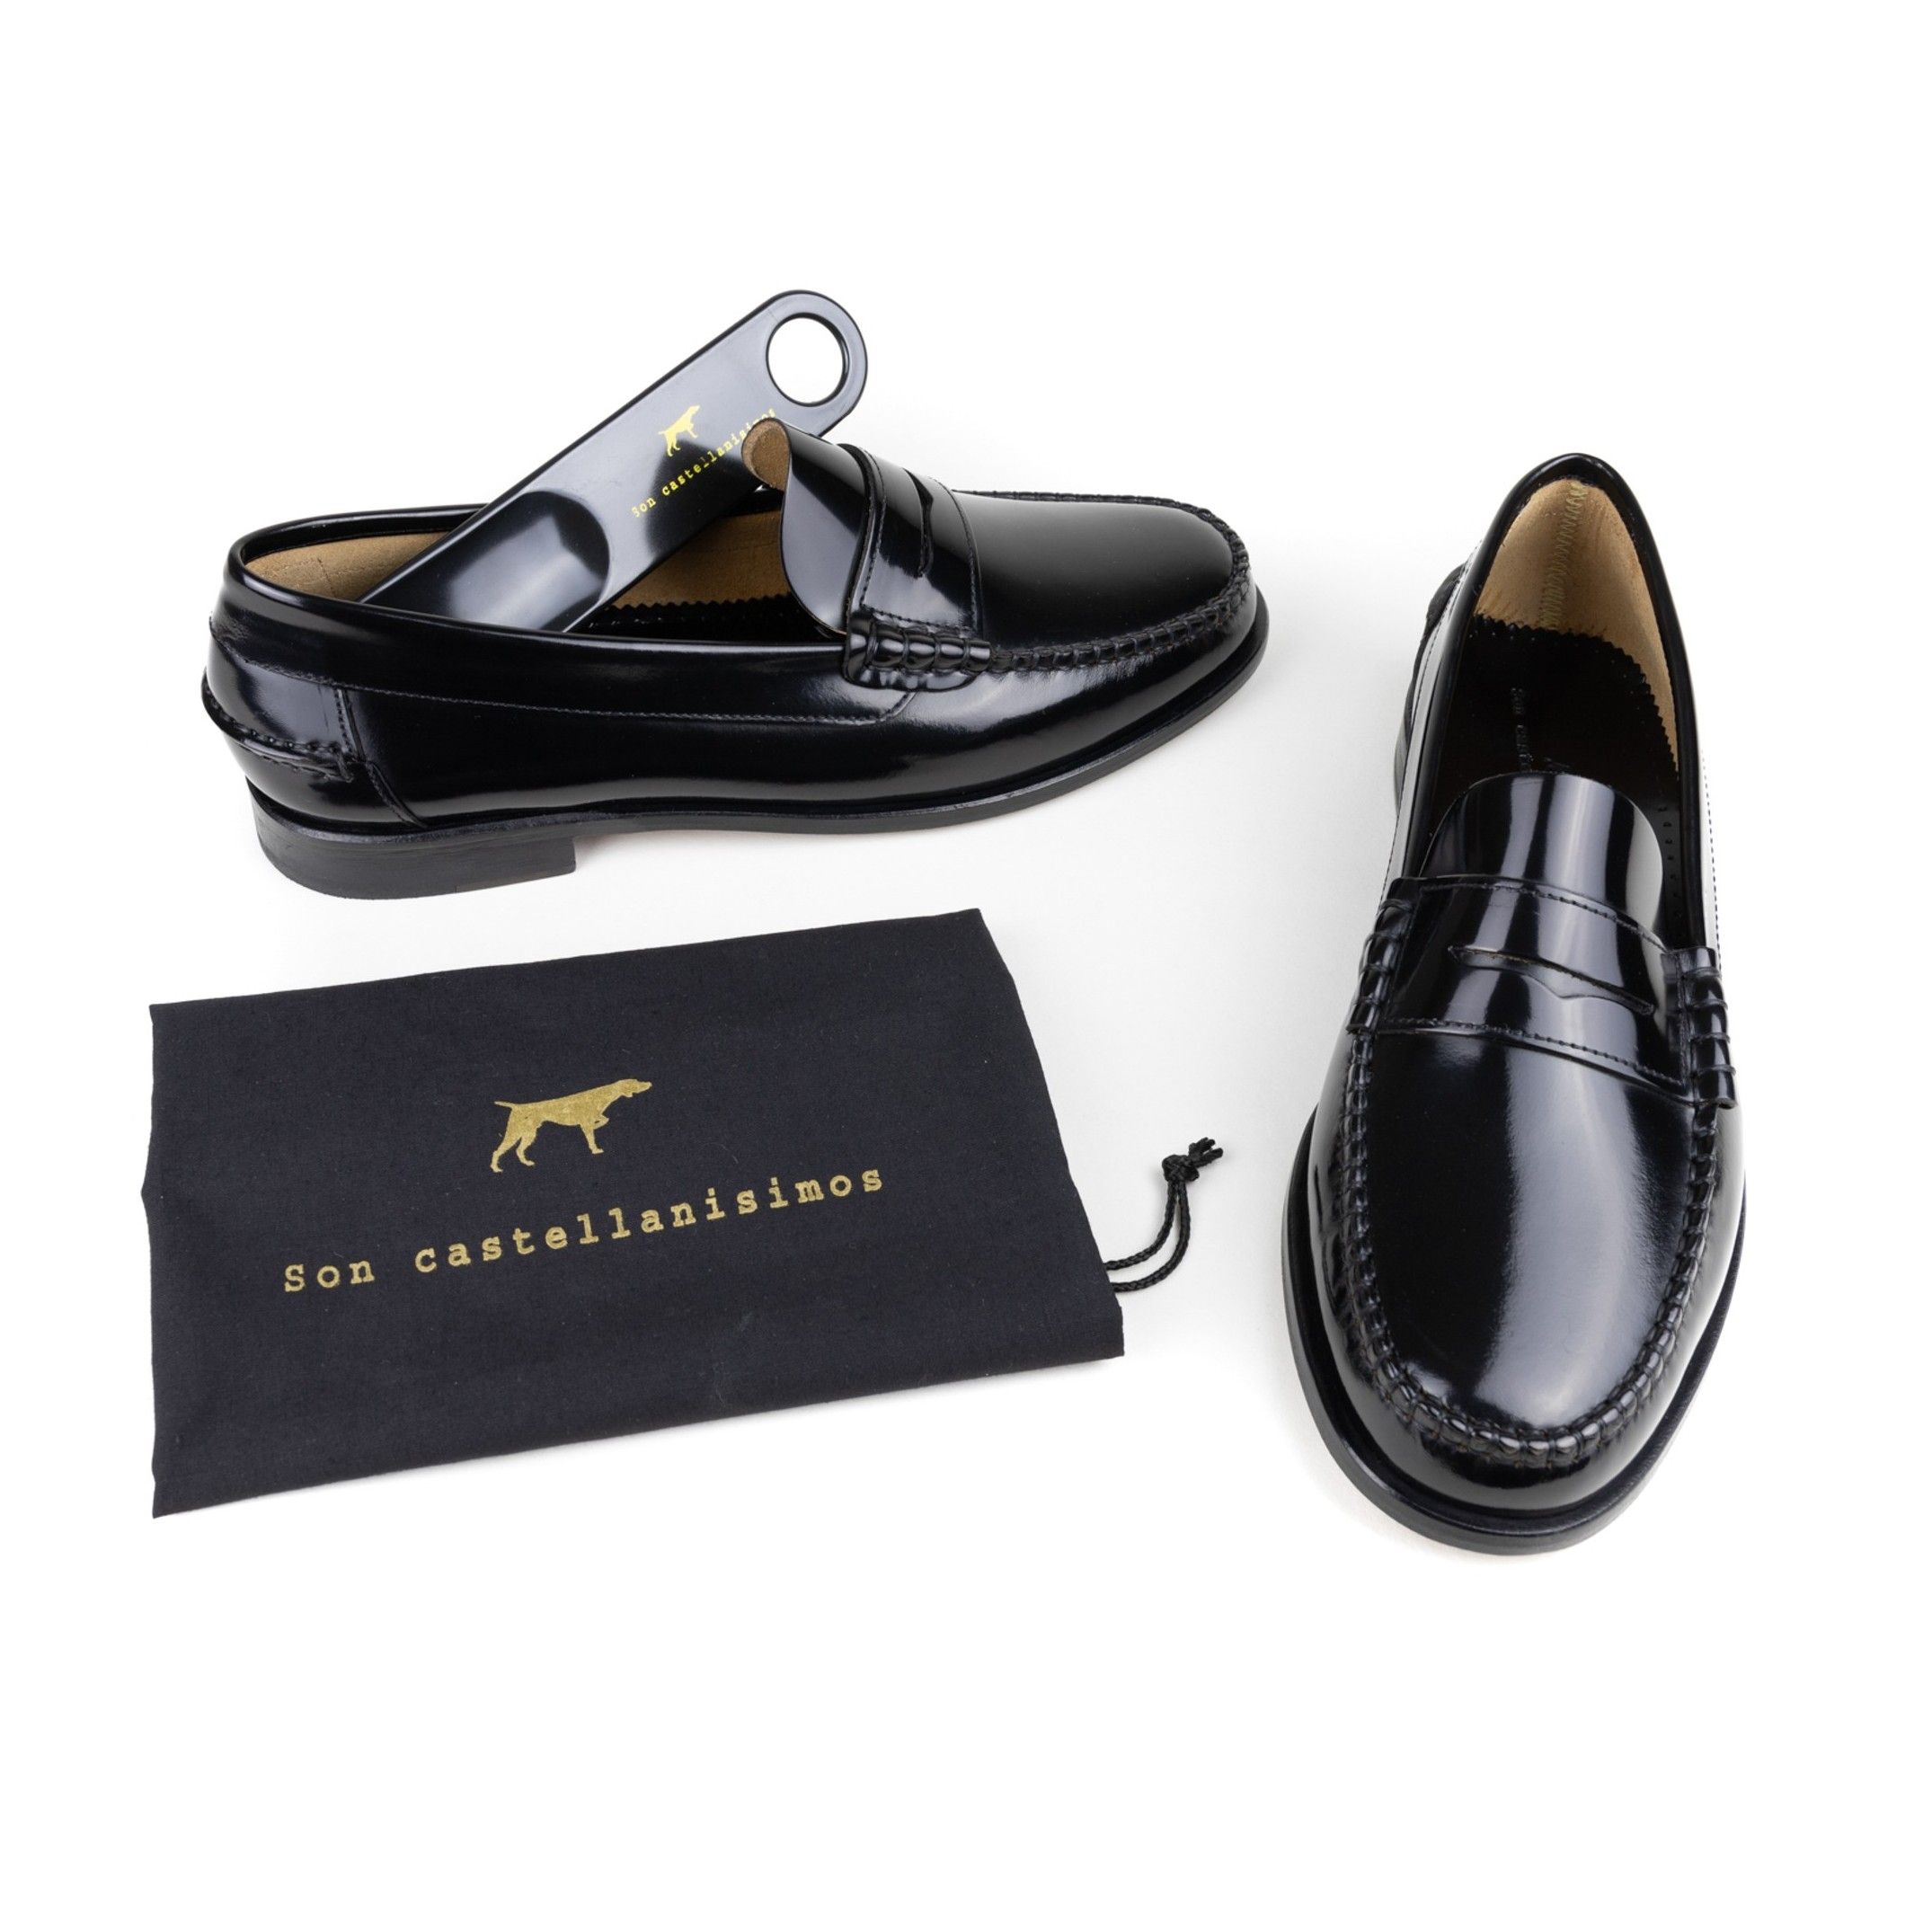 Florentic leather loafers for men. Premium collection of Son Castellanisimos. Outer: cowhide leather. Inner: Cowhide leather. Closure: no closure / open. Inner lining and insole: cowhide leather. Outsole Material: high quality leather. Heel height: 2 cm. Designed and manufactured in Spain.